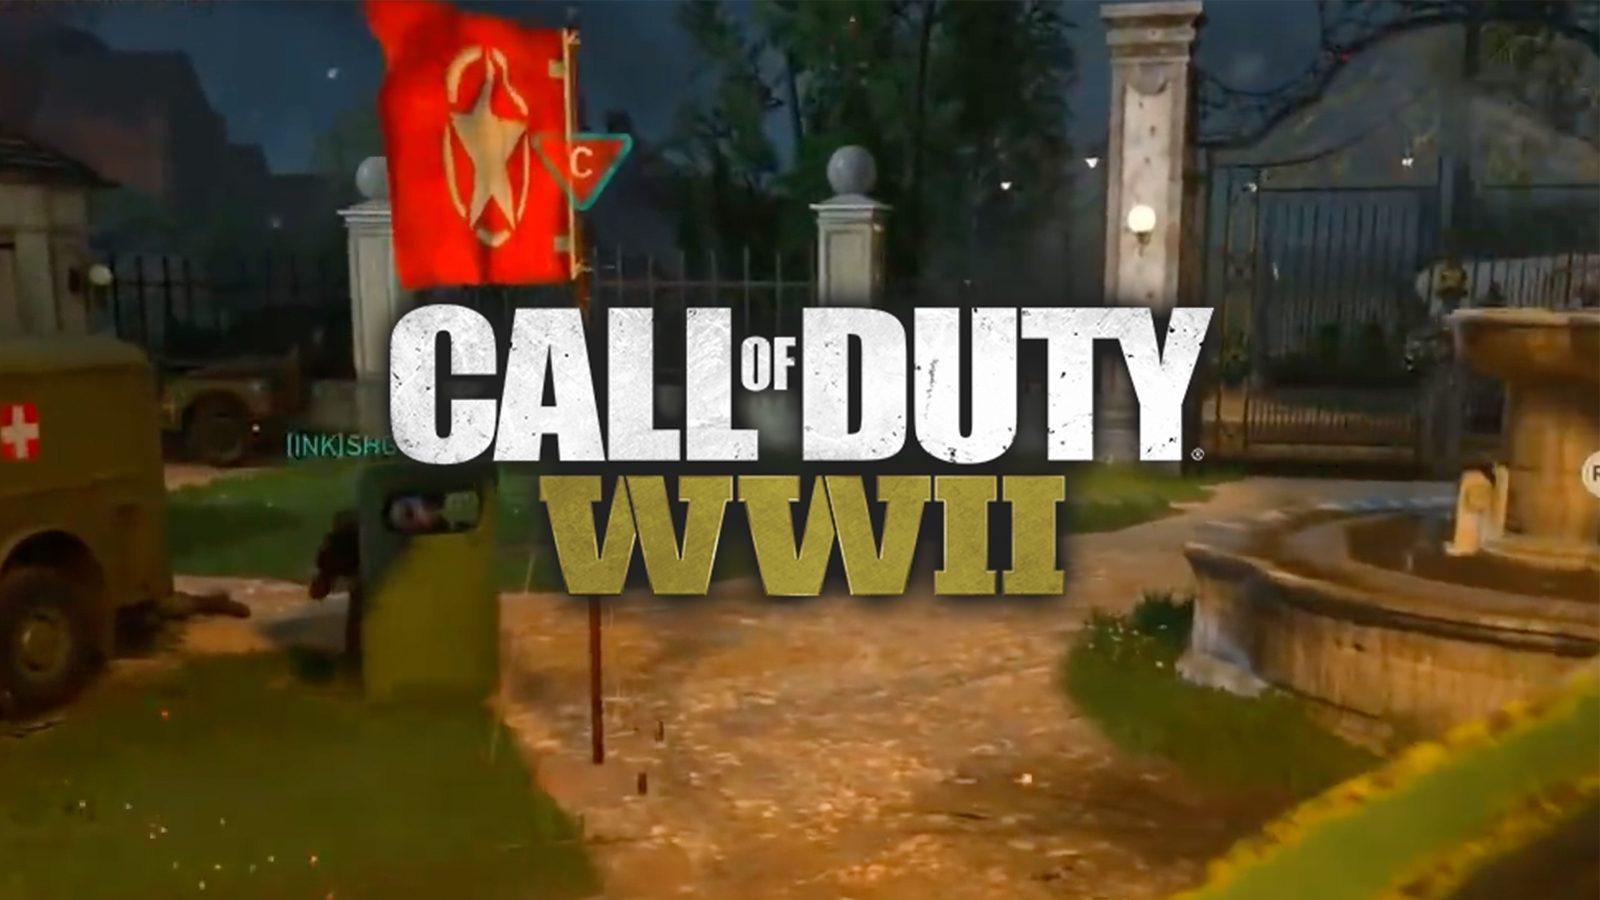 Call of Duty: WWII  Veteran Walkthrough [Full Game - Complete